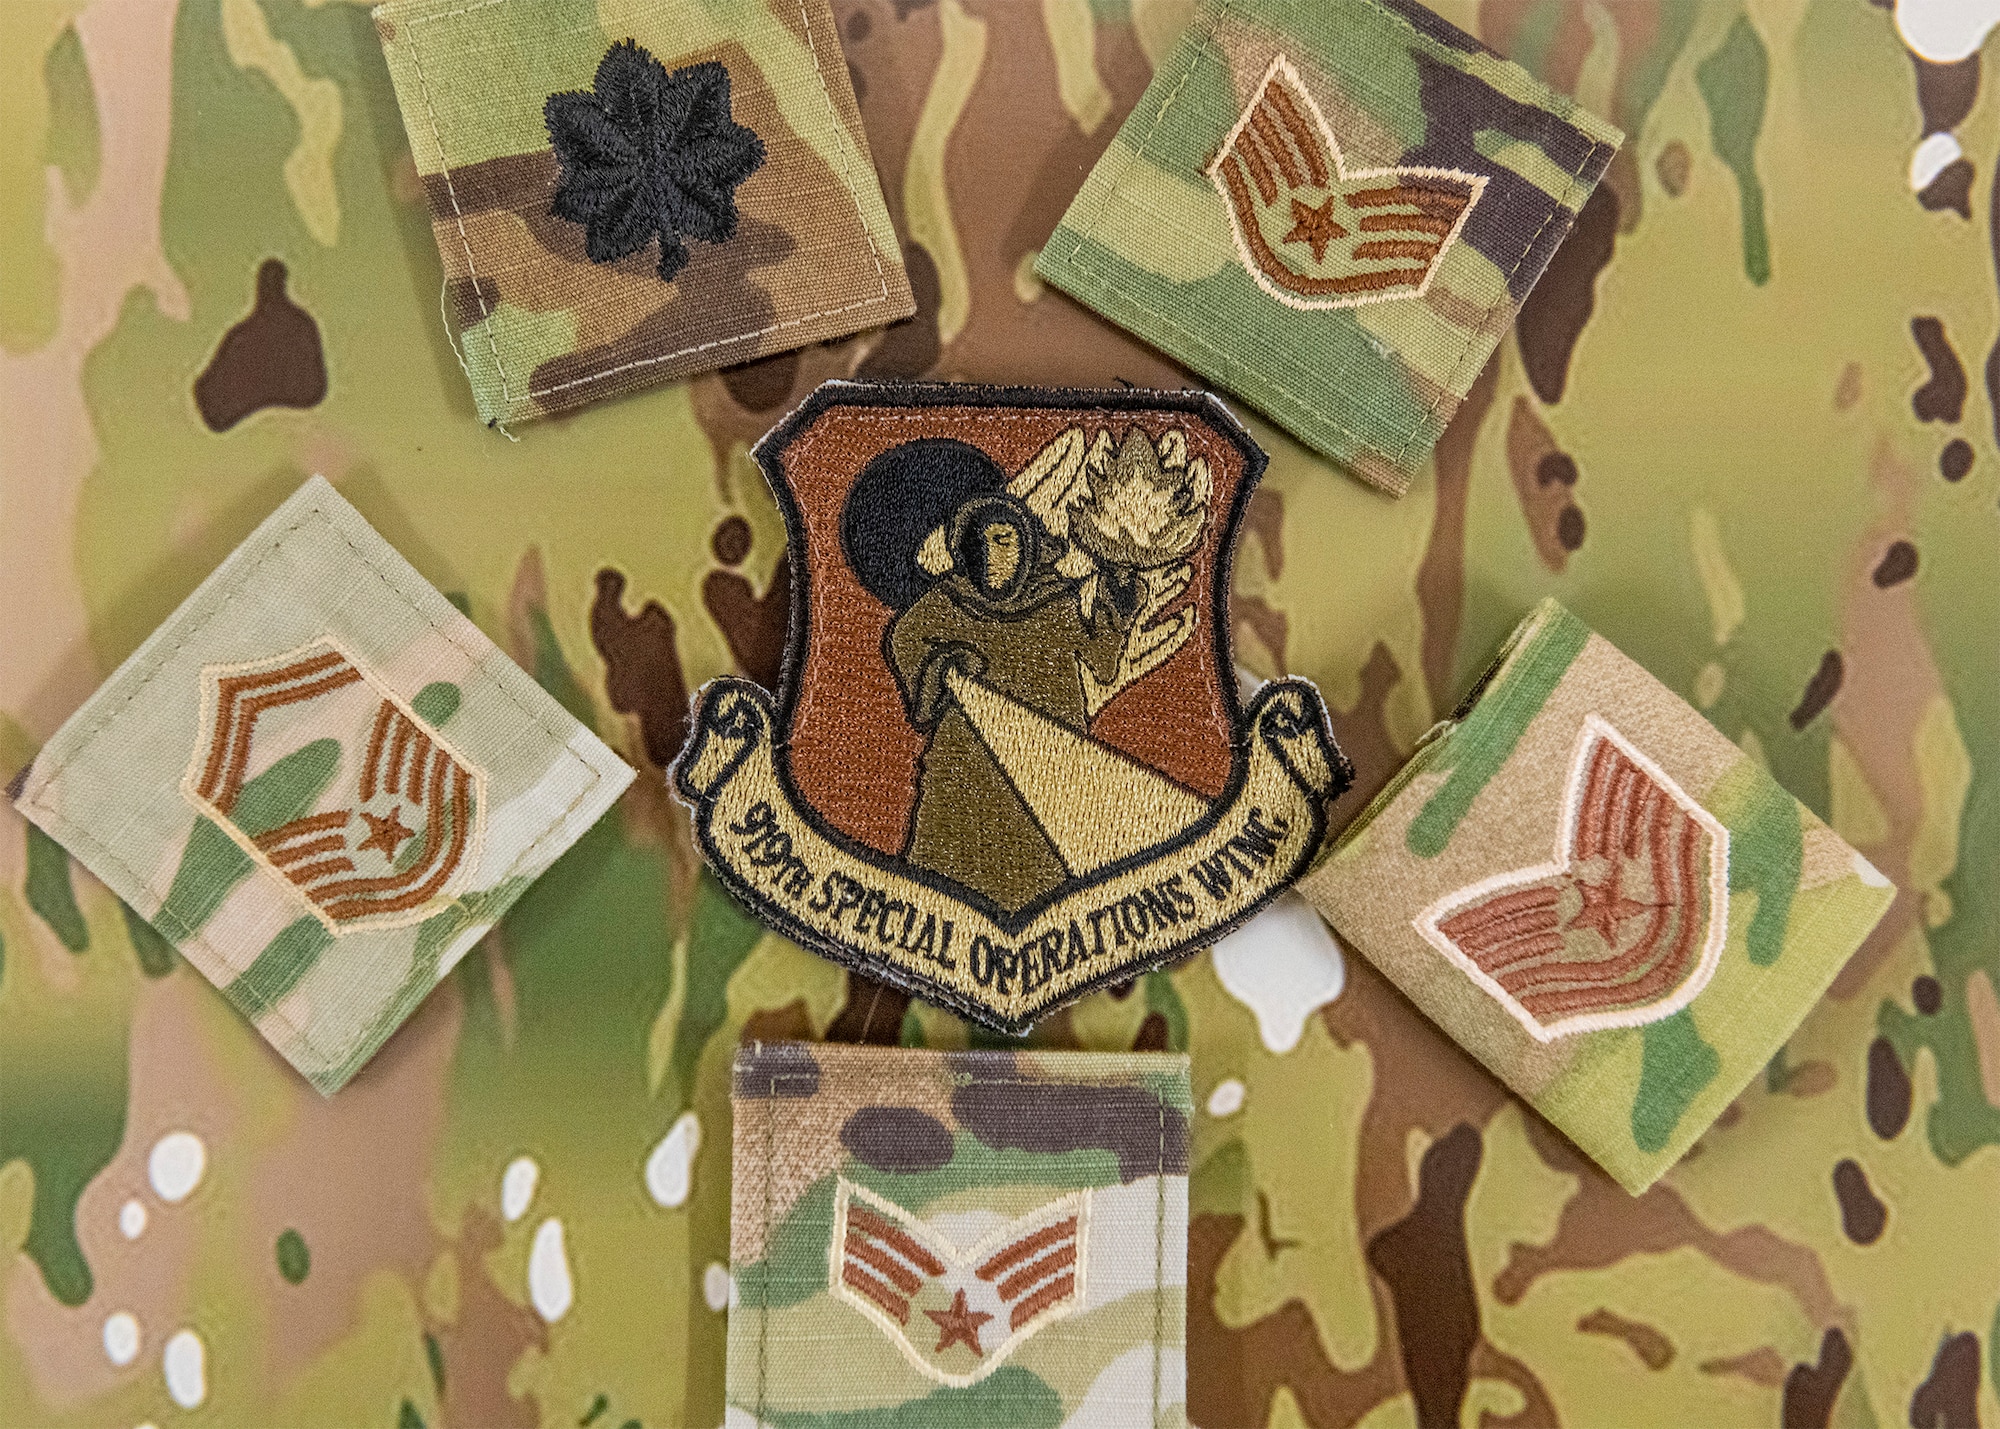 A 919th Special Operations Wing patch sits on an operational camouflage pattern backdrop at Duke Field, July 7, 2020. (U.S. Air Force photo by Senior Airman Dylan Gentile)